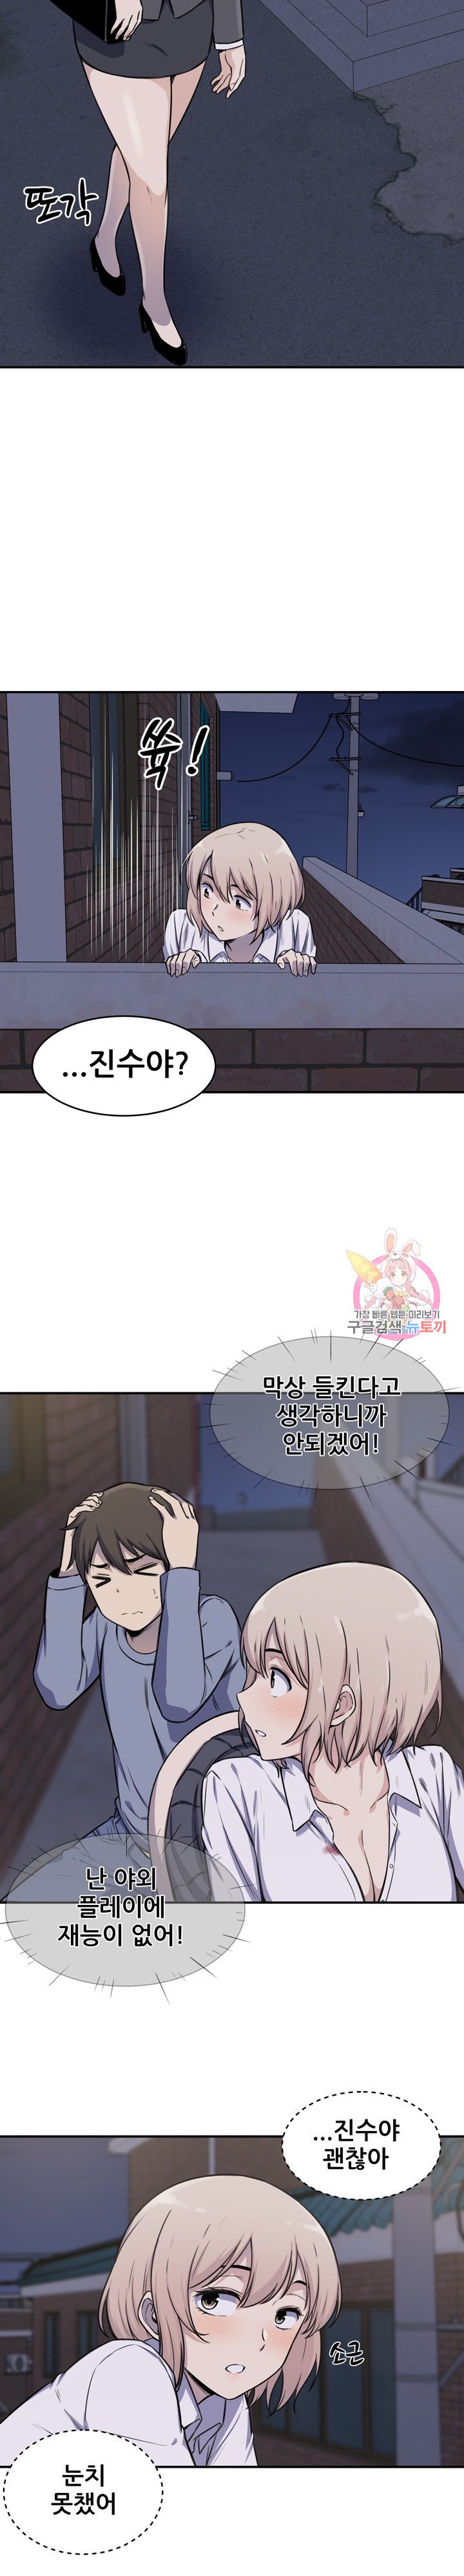 the-ark-is-me-raw-chap-31-1